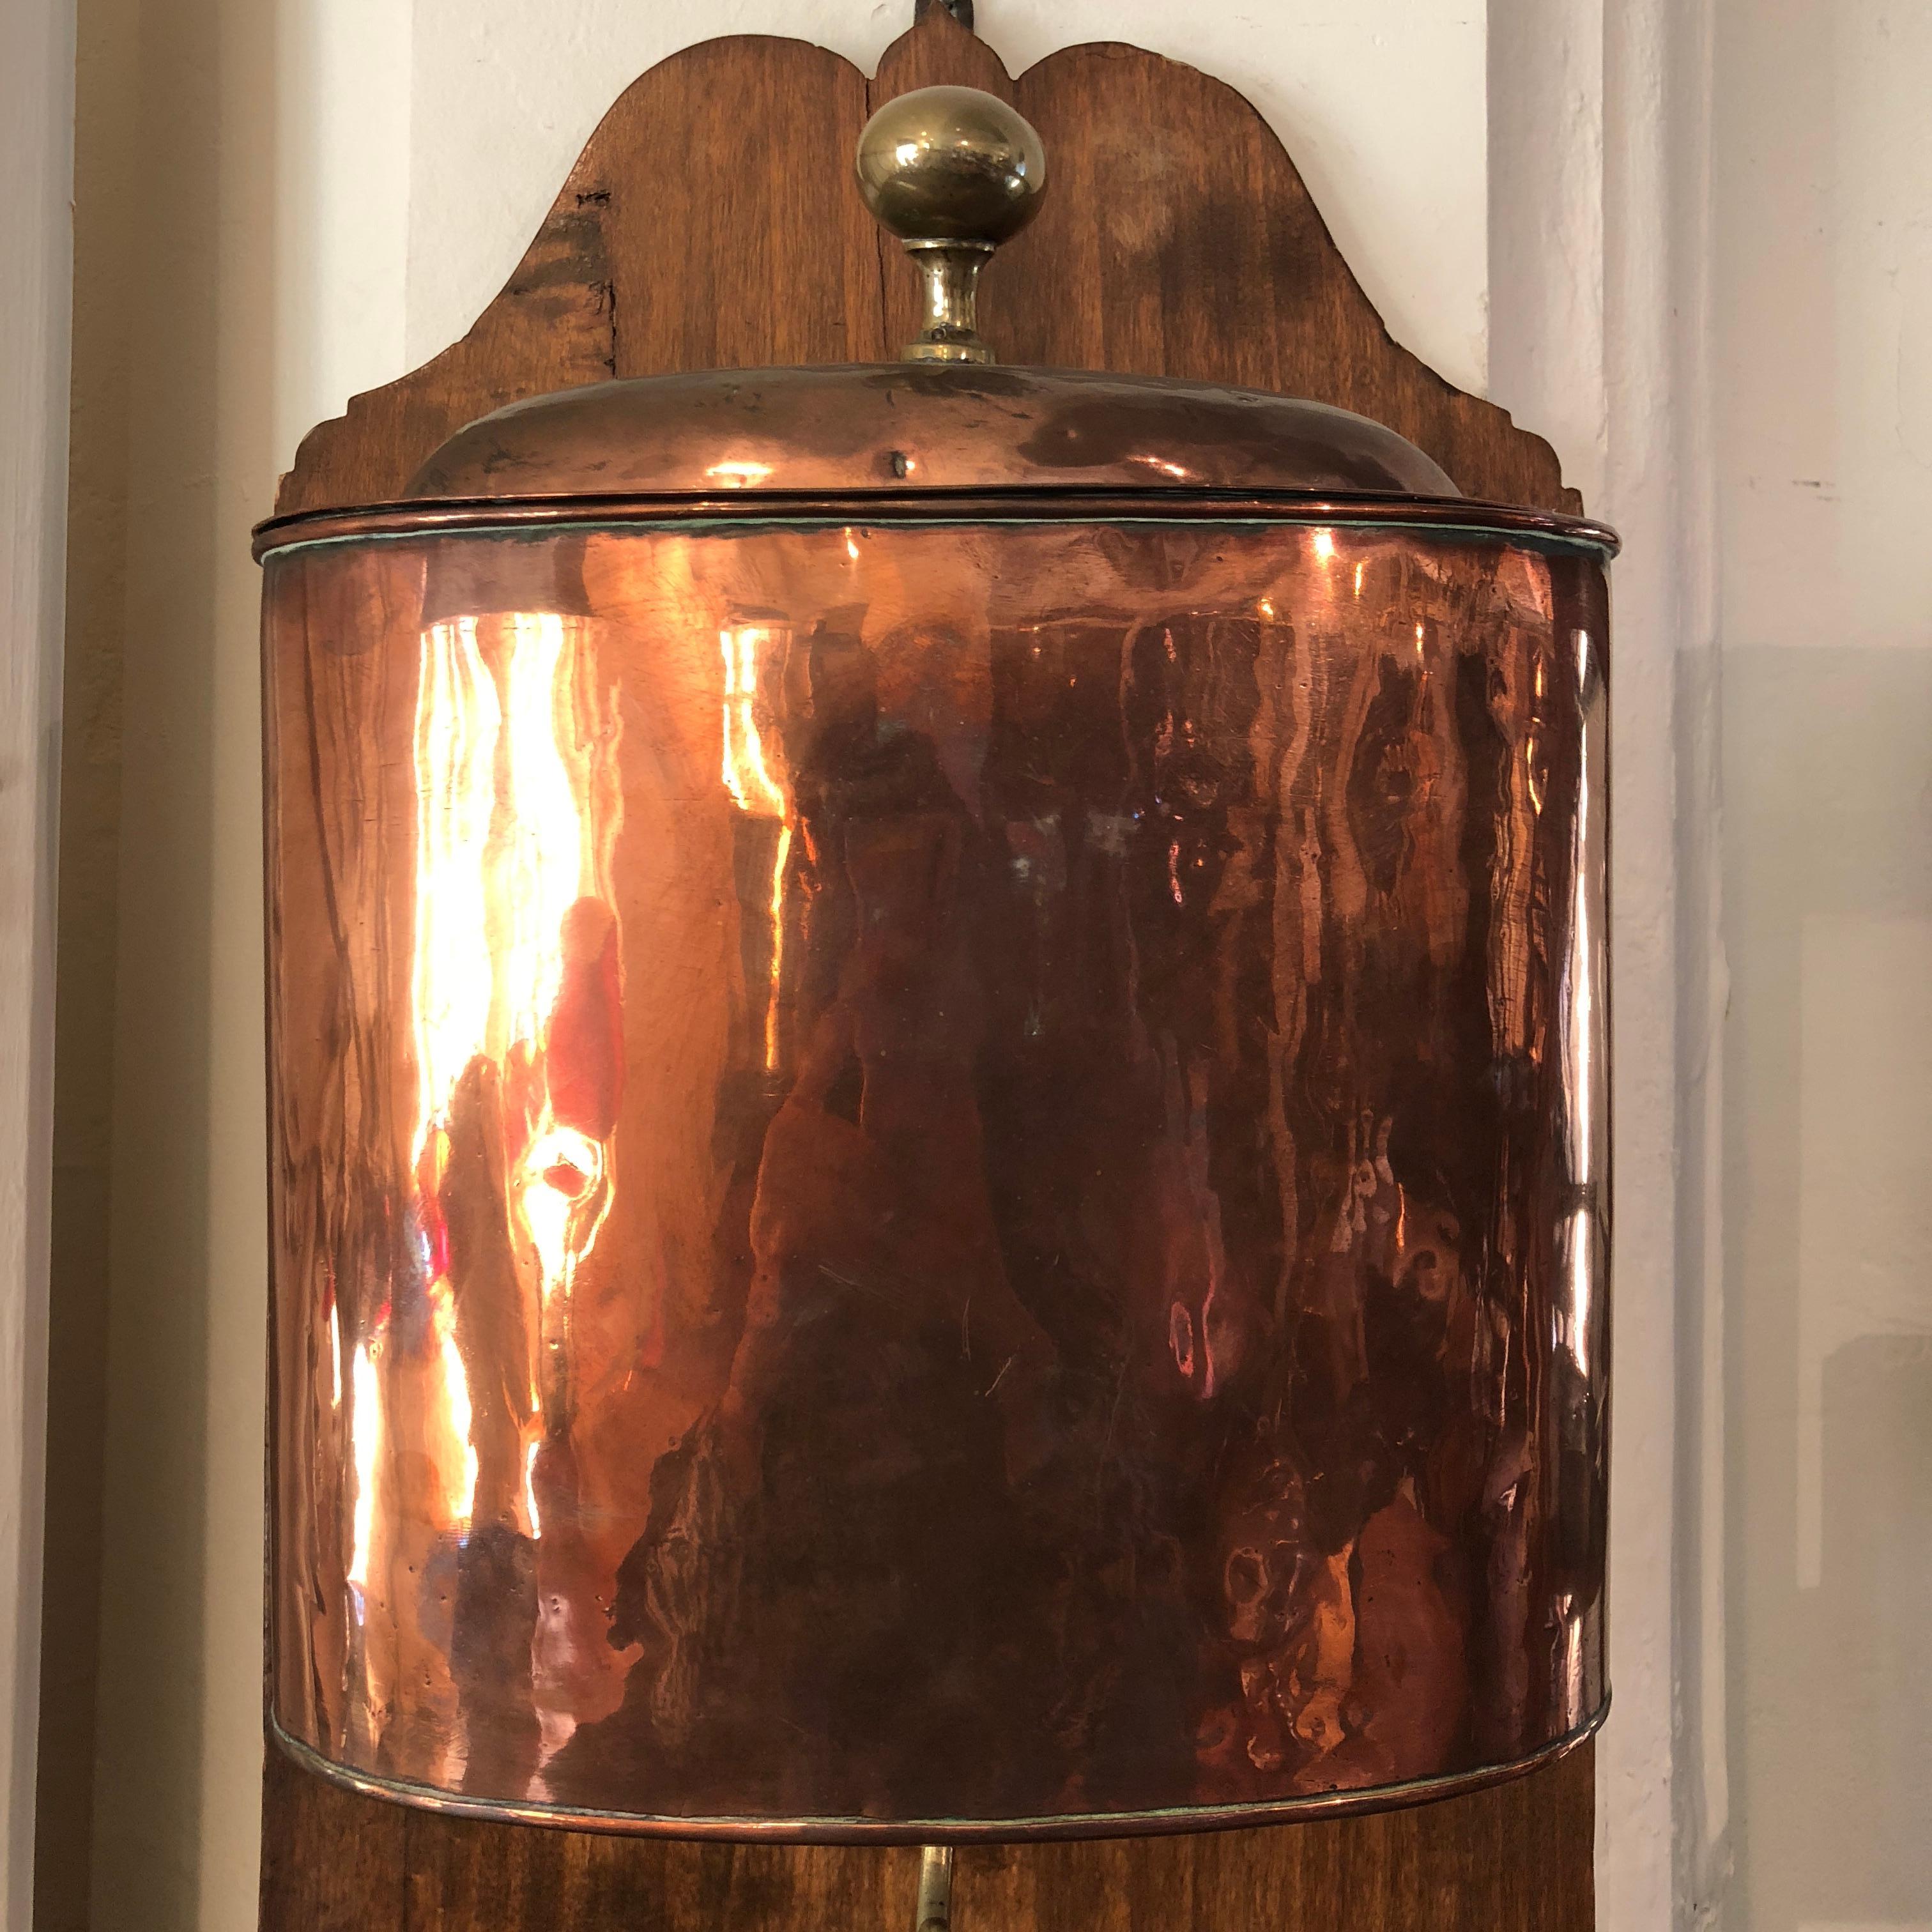 This splendid early 19th century French copper Lavabo (hand washer), has been mounted on a French oak plaque and features an all copper cistern and basin and a brass spigot. This stunning, collectable piece can be mounted as a decorative feature in